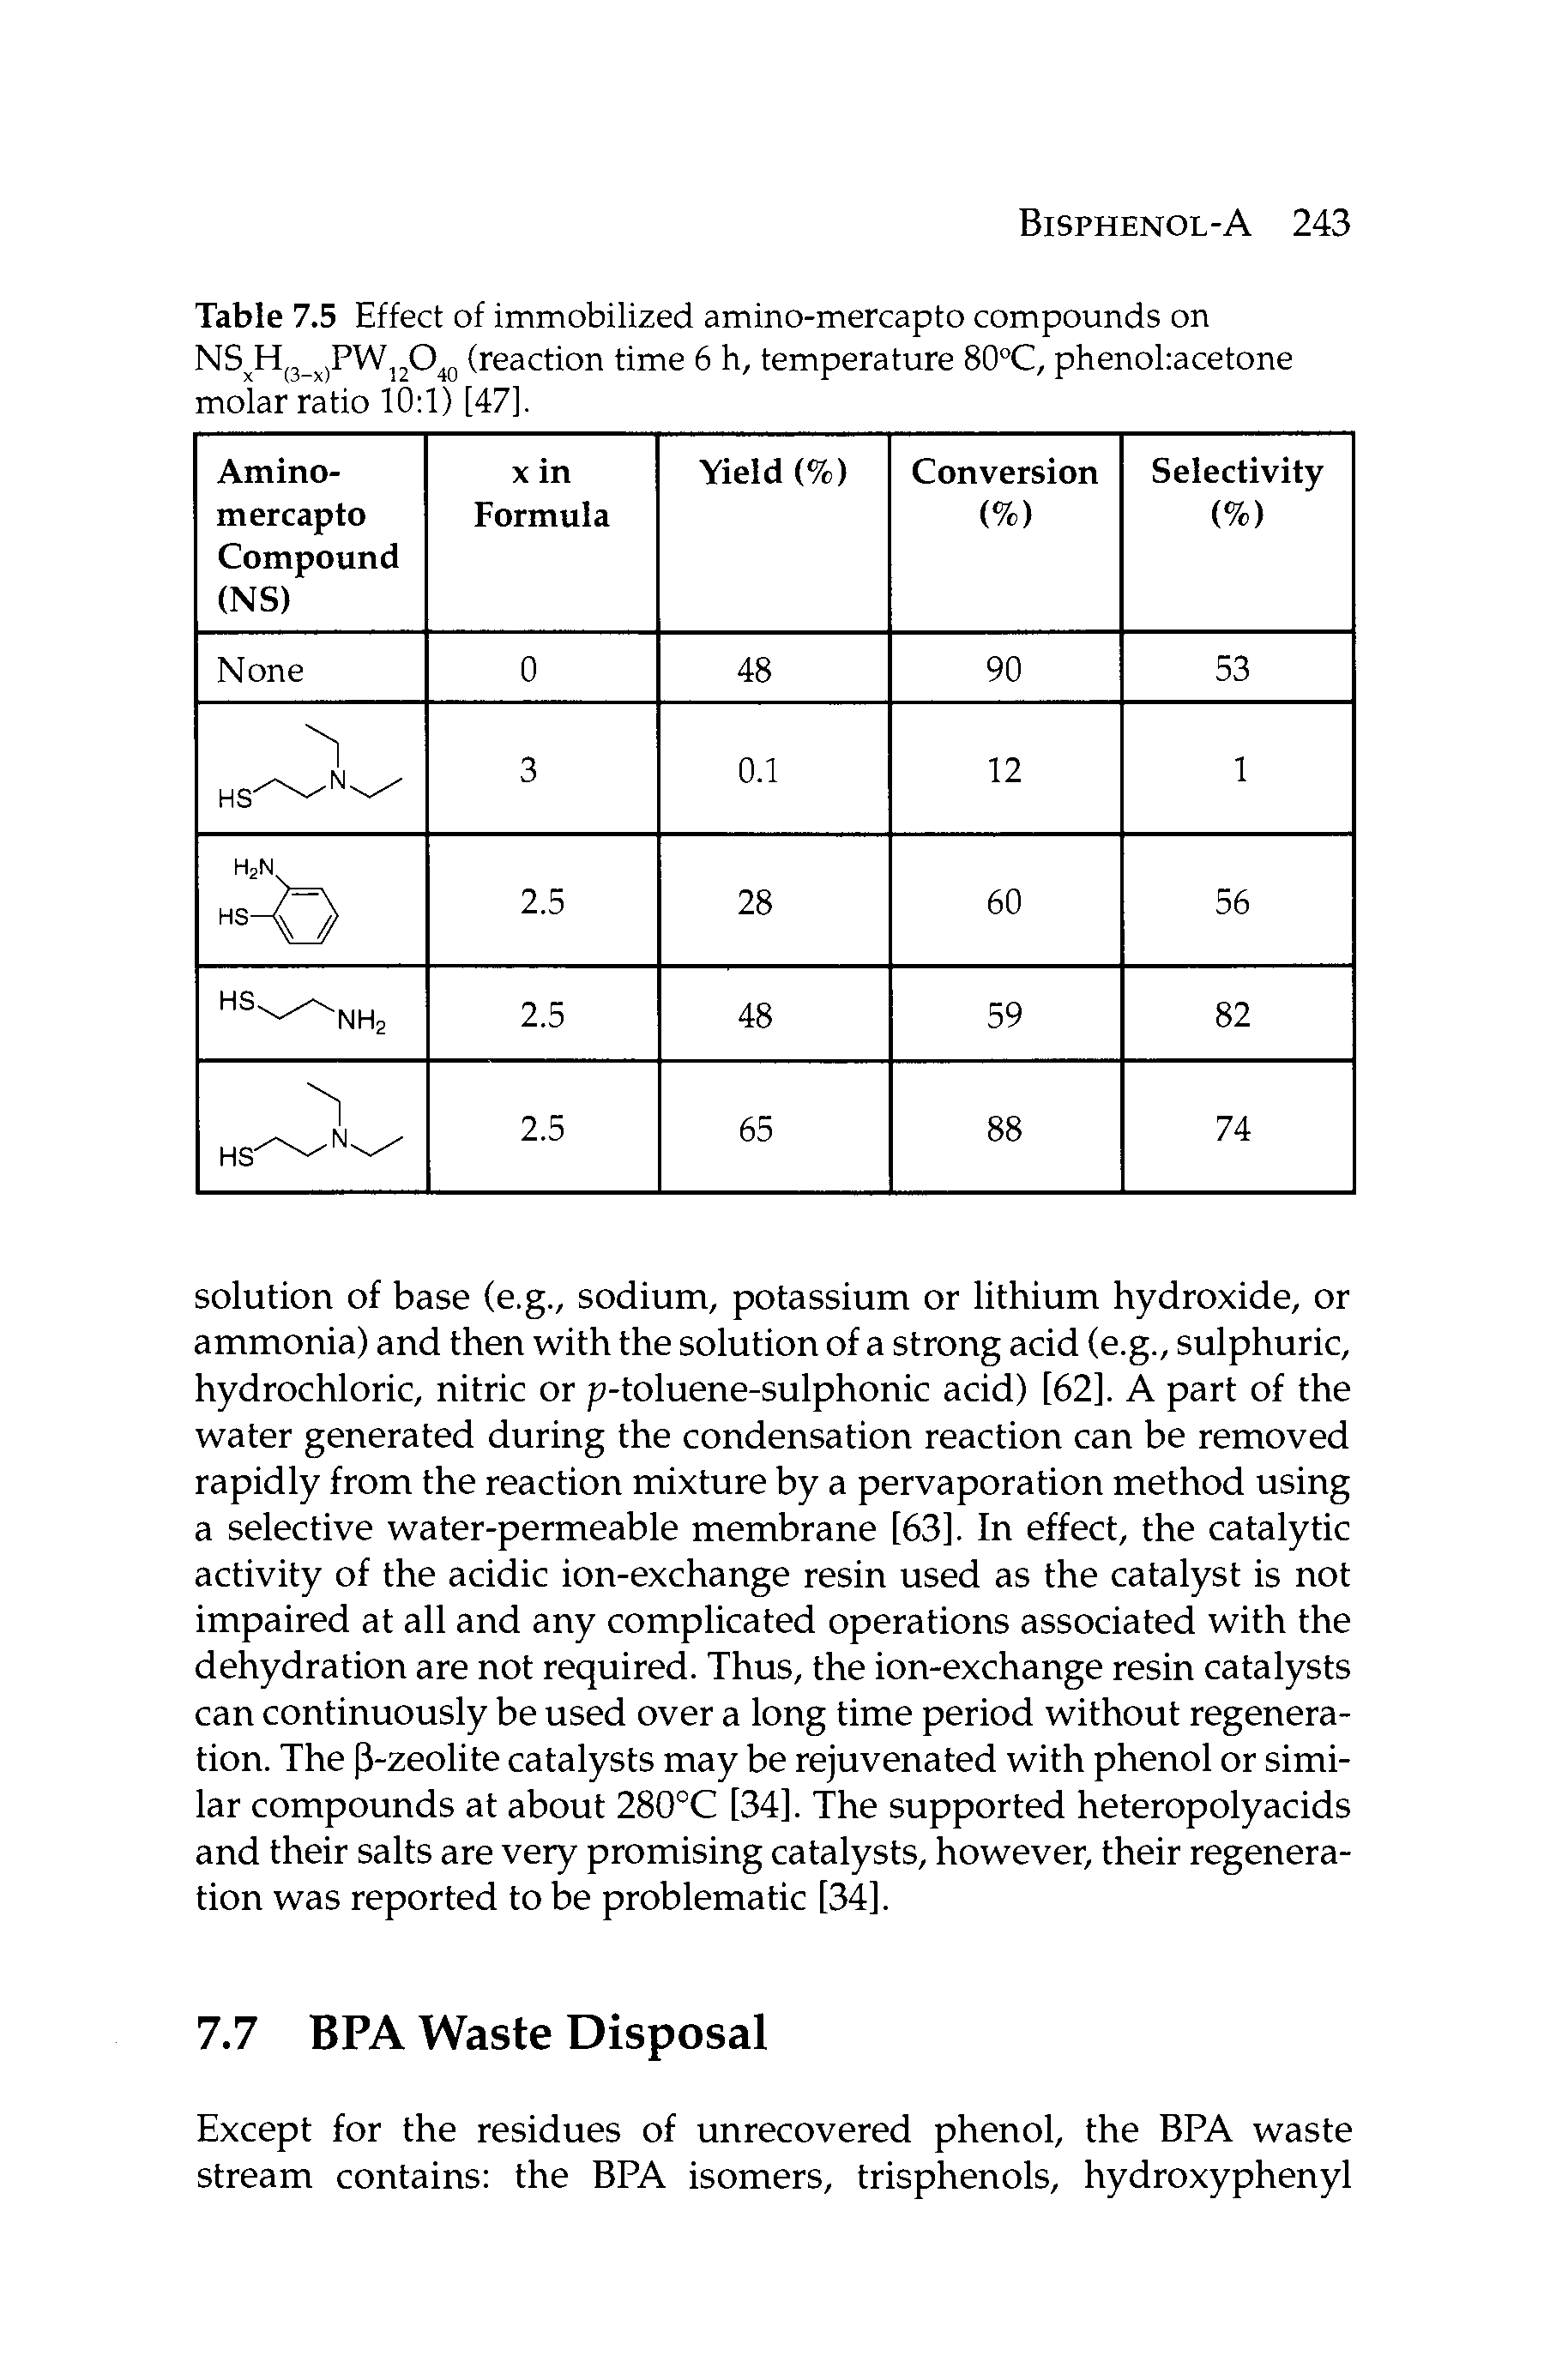 Table 7.5 Effect of immobilized amino-mercapto compounds on NS H 3 jPW,20 p (reaction time 6 h, temperature 80°C, phenoEacetone molar ratio 10 1) [47].